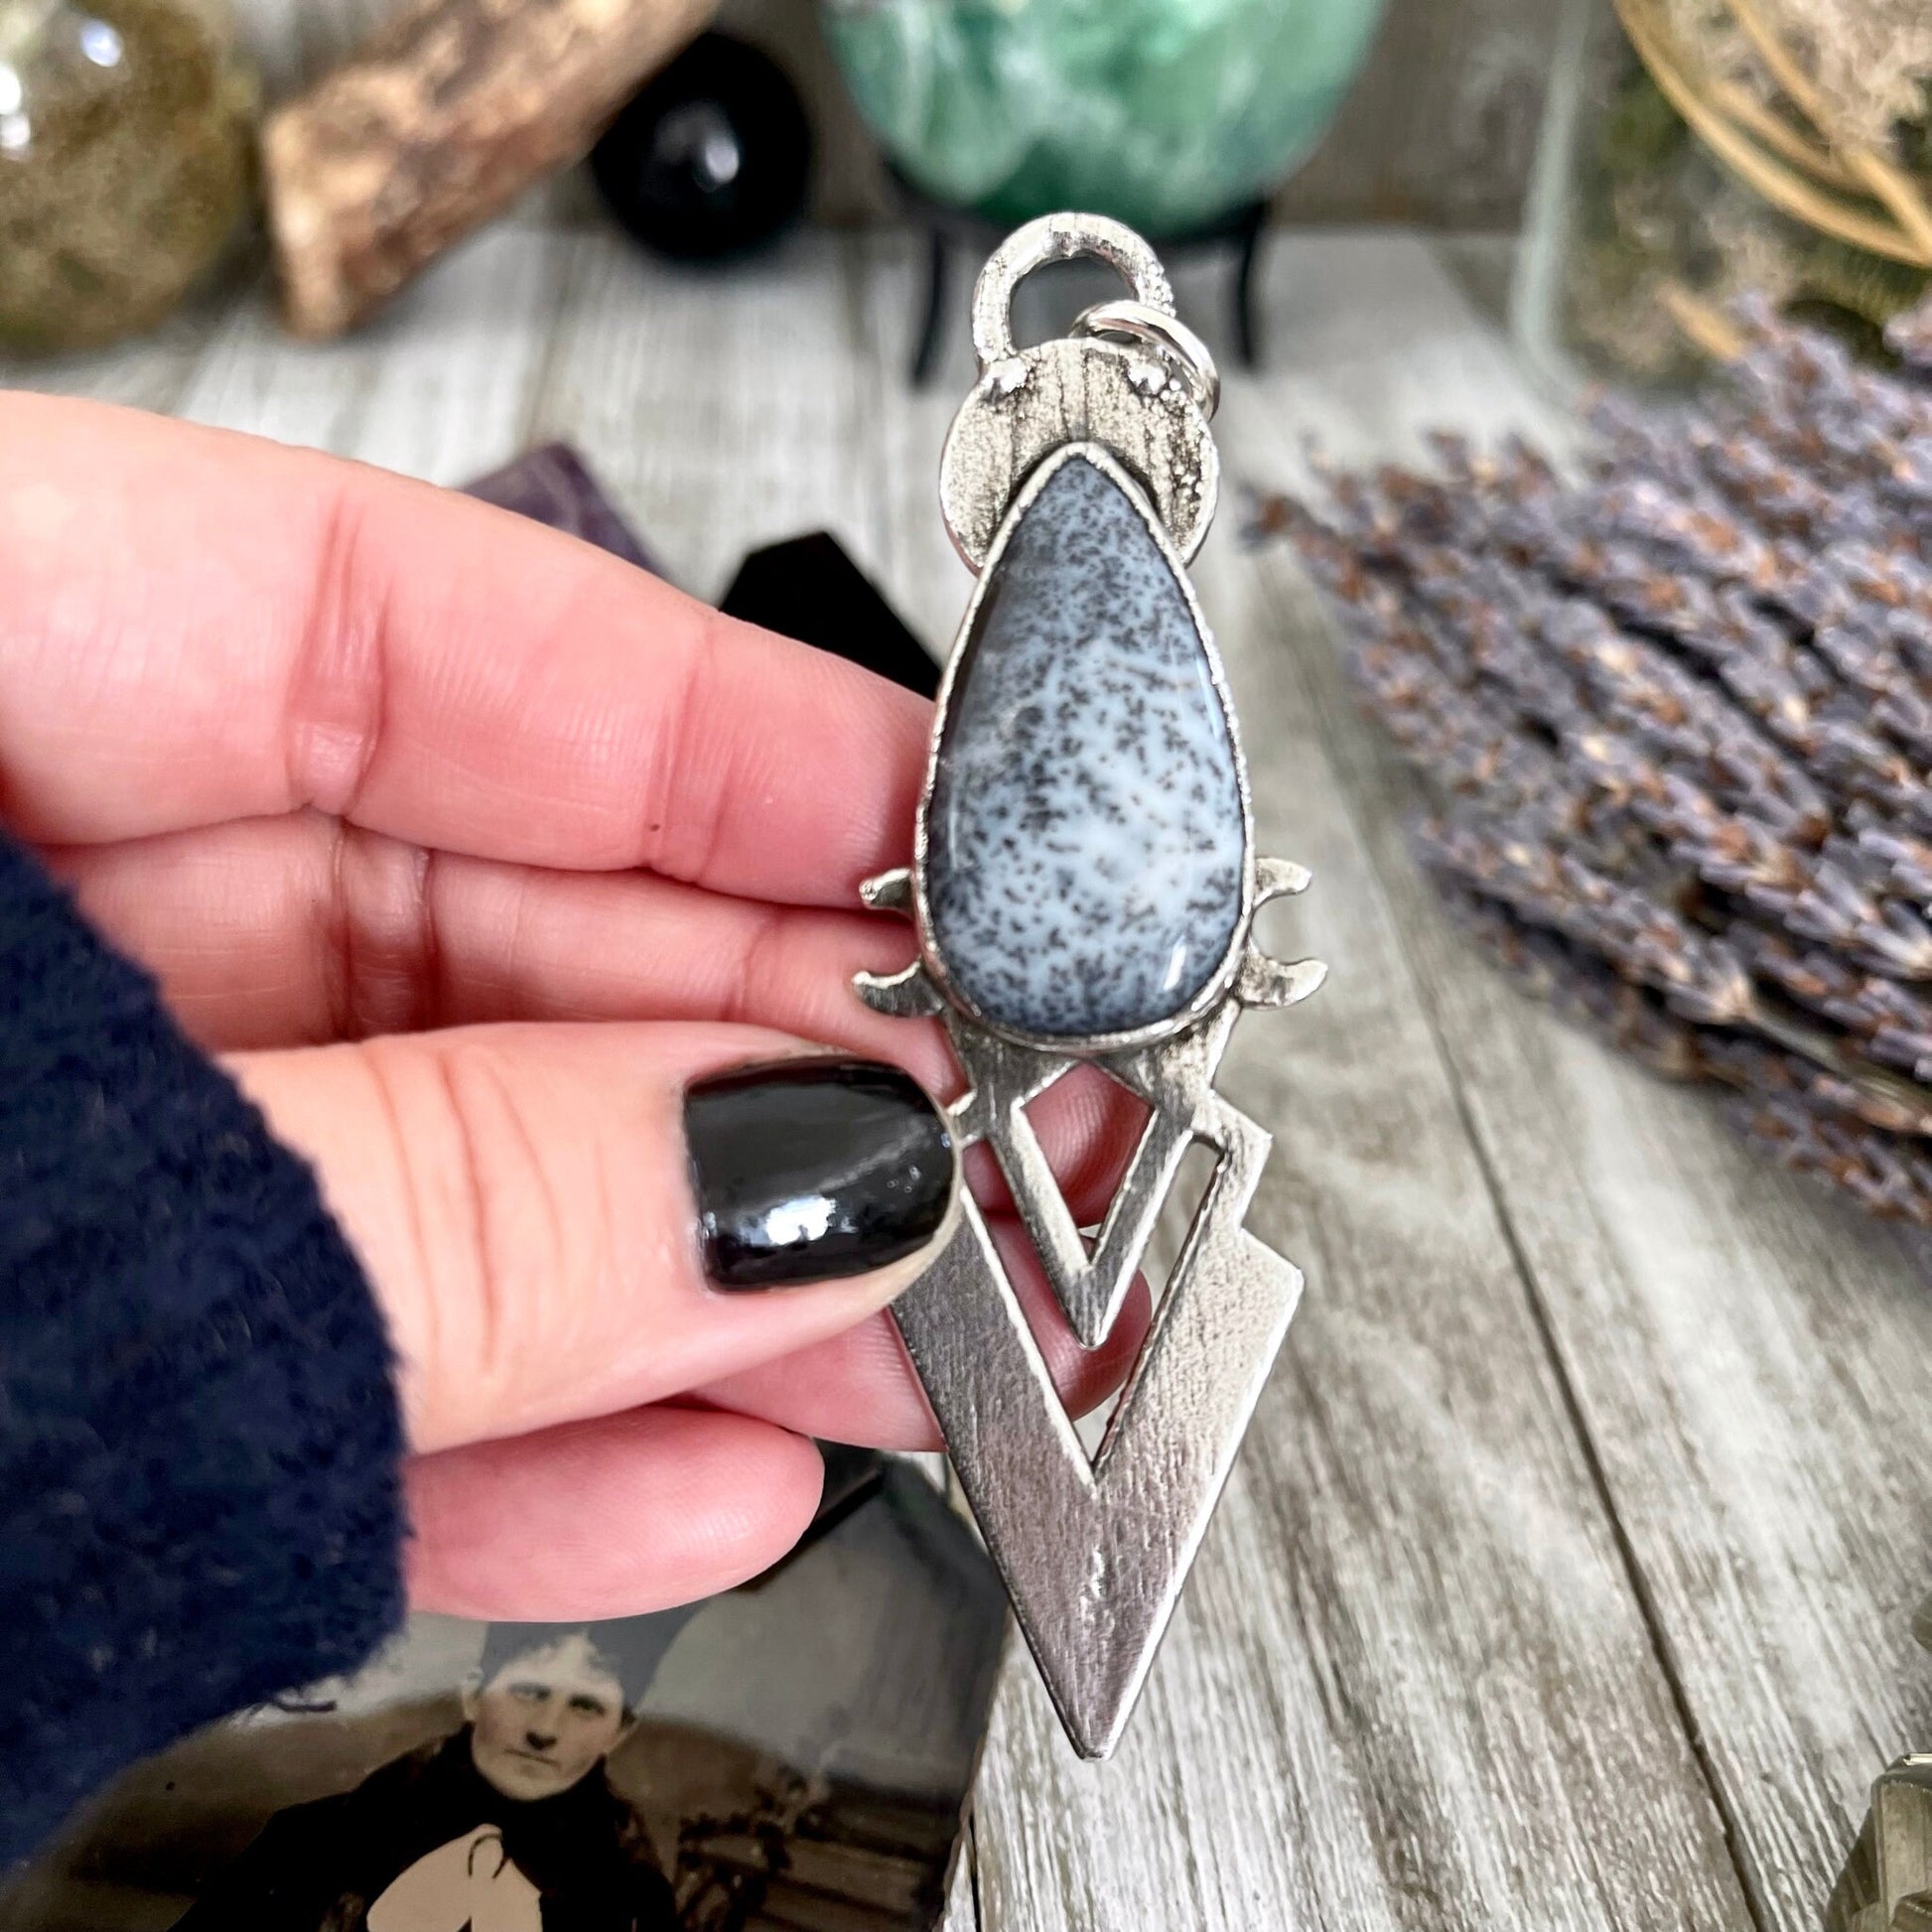 Big Crystal Necklace, Big Stone Necklace, Bohemian Jewelry, Crystal Necklaces, Etsy ID: 1556761578, Foxlark Alchemy, FOXLARK- NECKLACES, Gothic Jewelry, Jewelry, Large Crystal, Large Raw Crystal, layering necklace, Necklaces, Raw crystal jewelry, raw crys